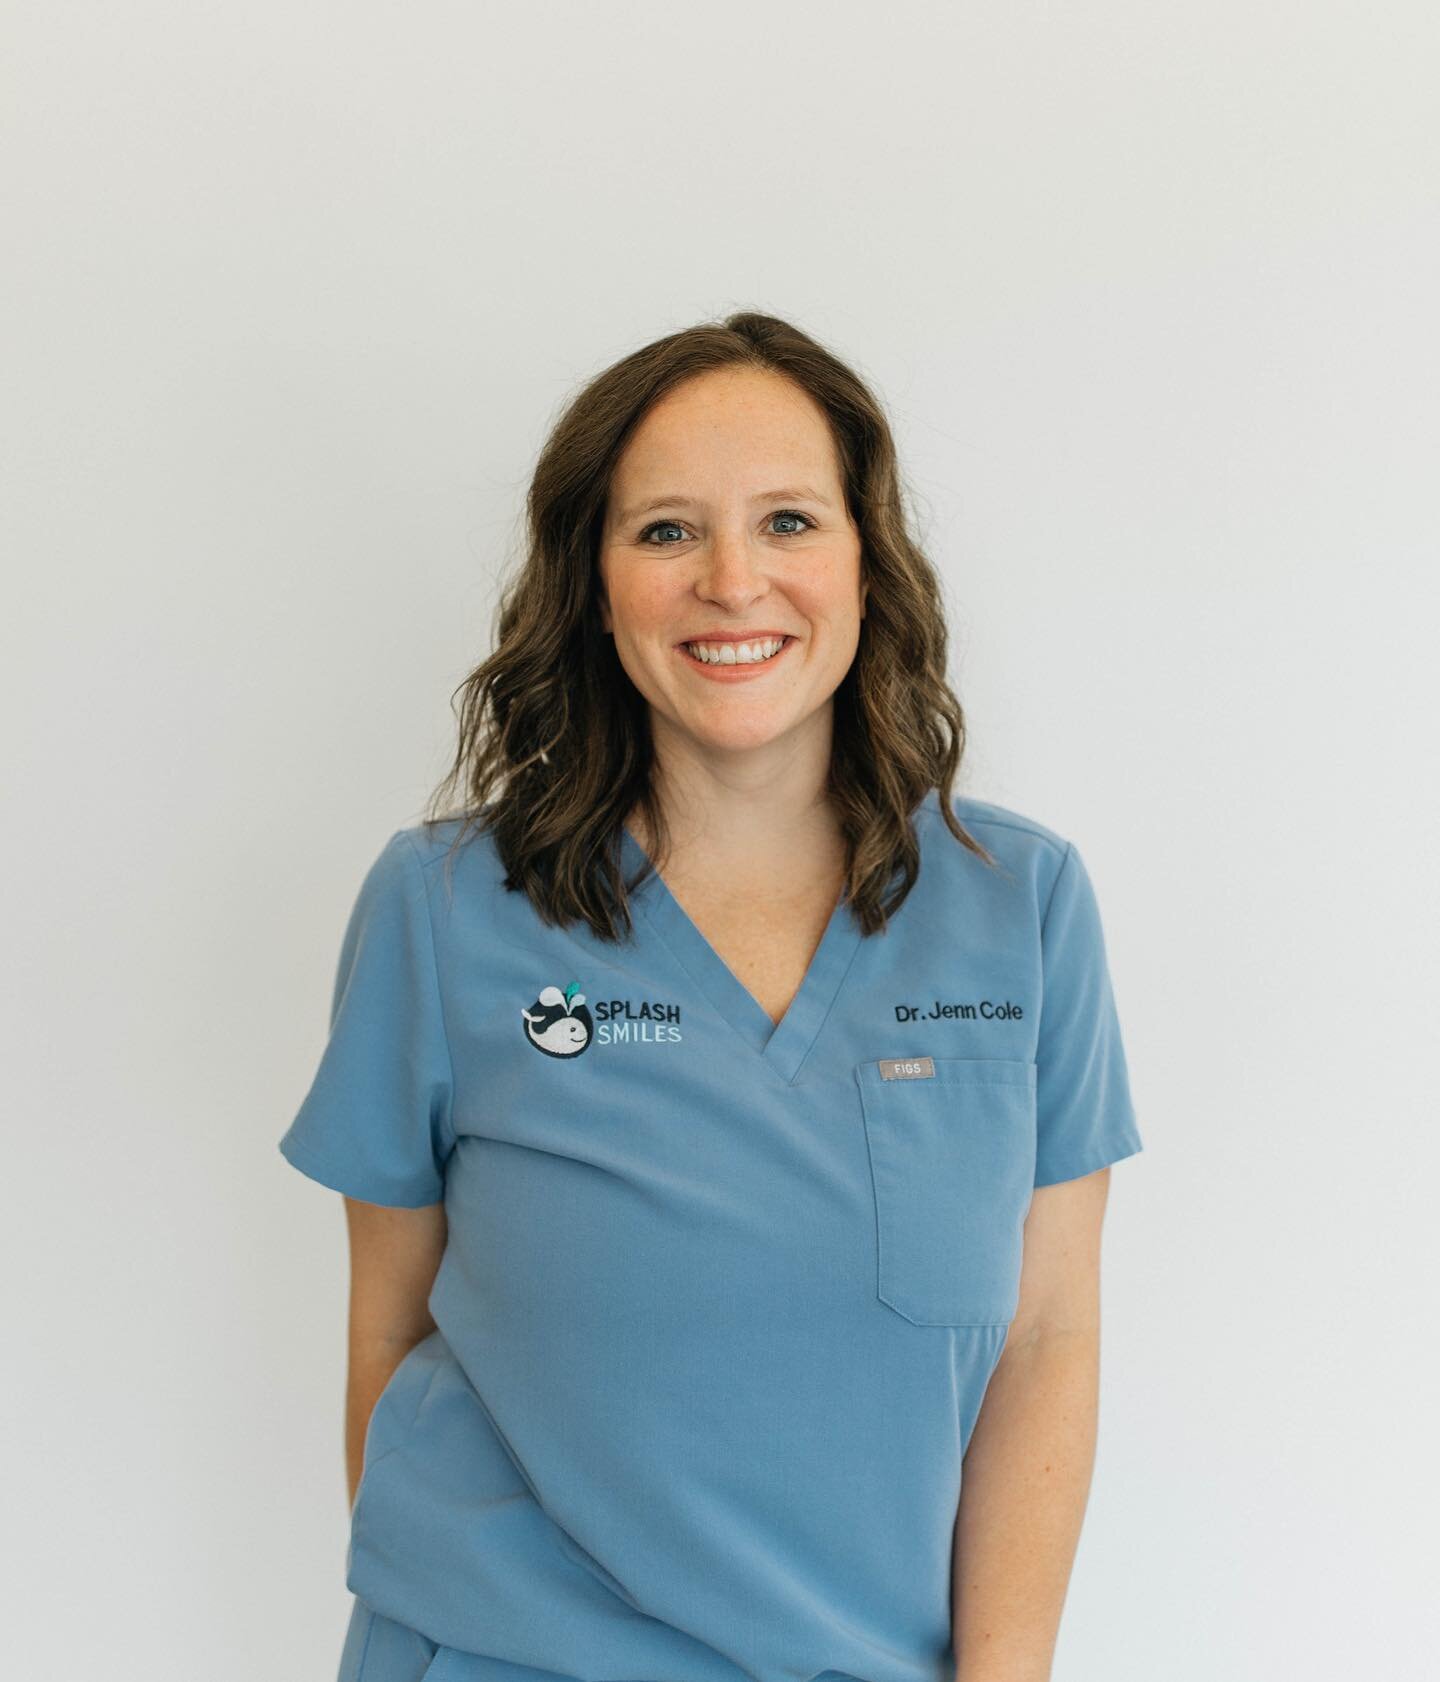 𝐌𝐞𝐞𝐭 𝐨𝐮𝐫 𝐃𝐨𝐜𝐭𝐨𝐫𝐬: 𝐃𝐫. 𝐉𝐞𝐧𝐧!
Dr. Jennifer Cole is from Chattanooga, TN, and attended Baylor School for high school. She then attended Washington and Lee University in Lexington, VA for her undergraduate studies receiving a Bachelor